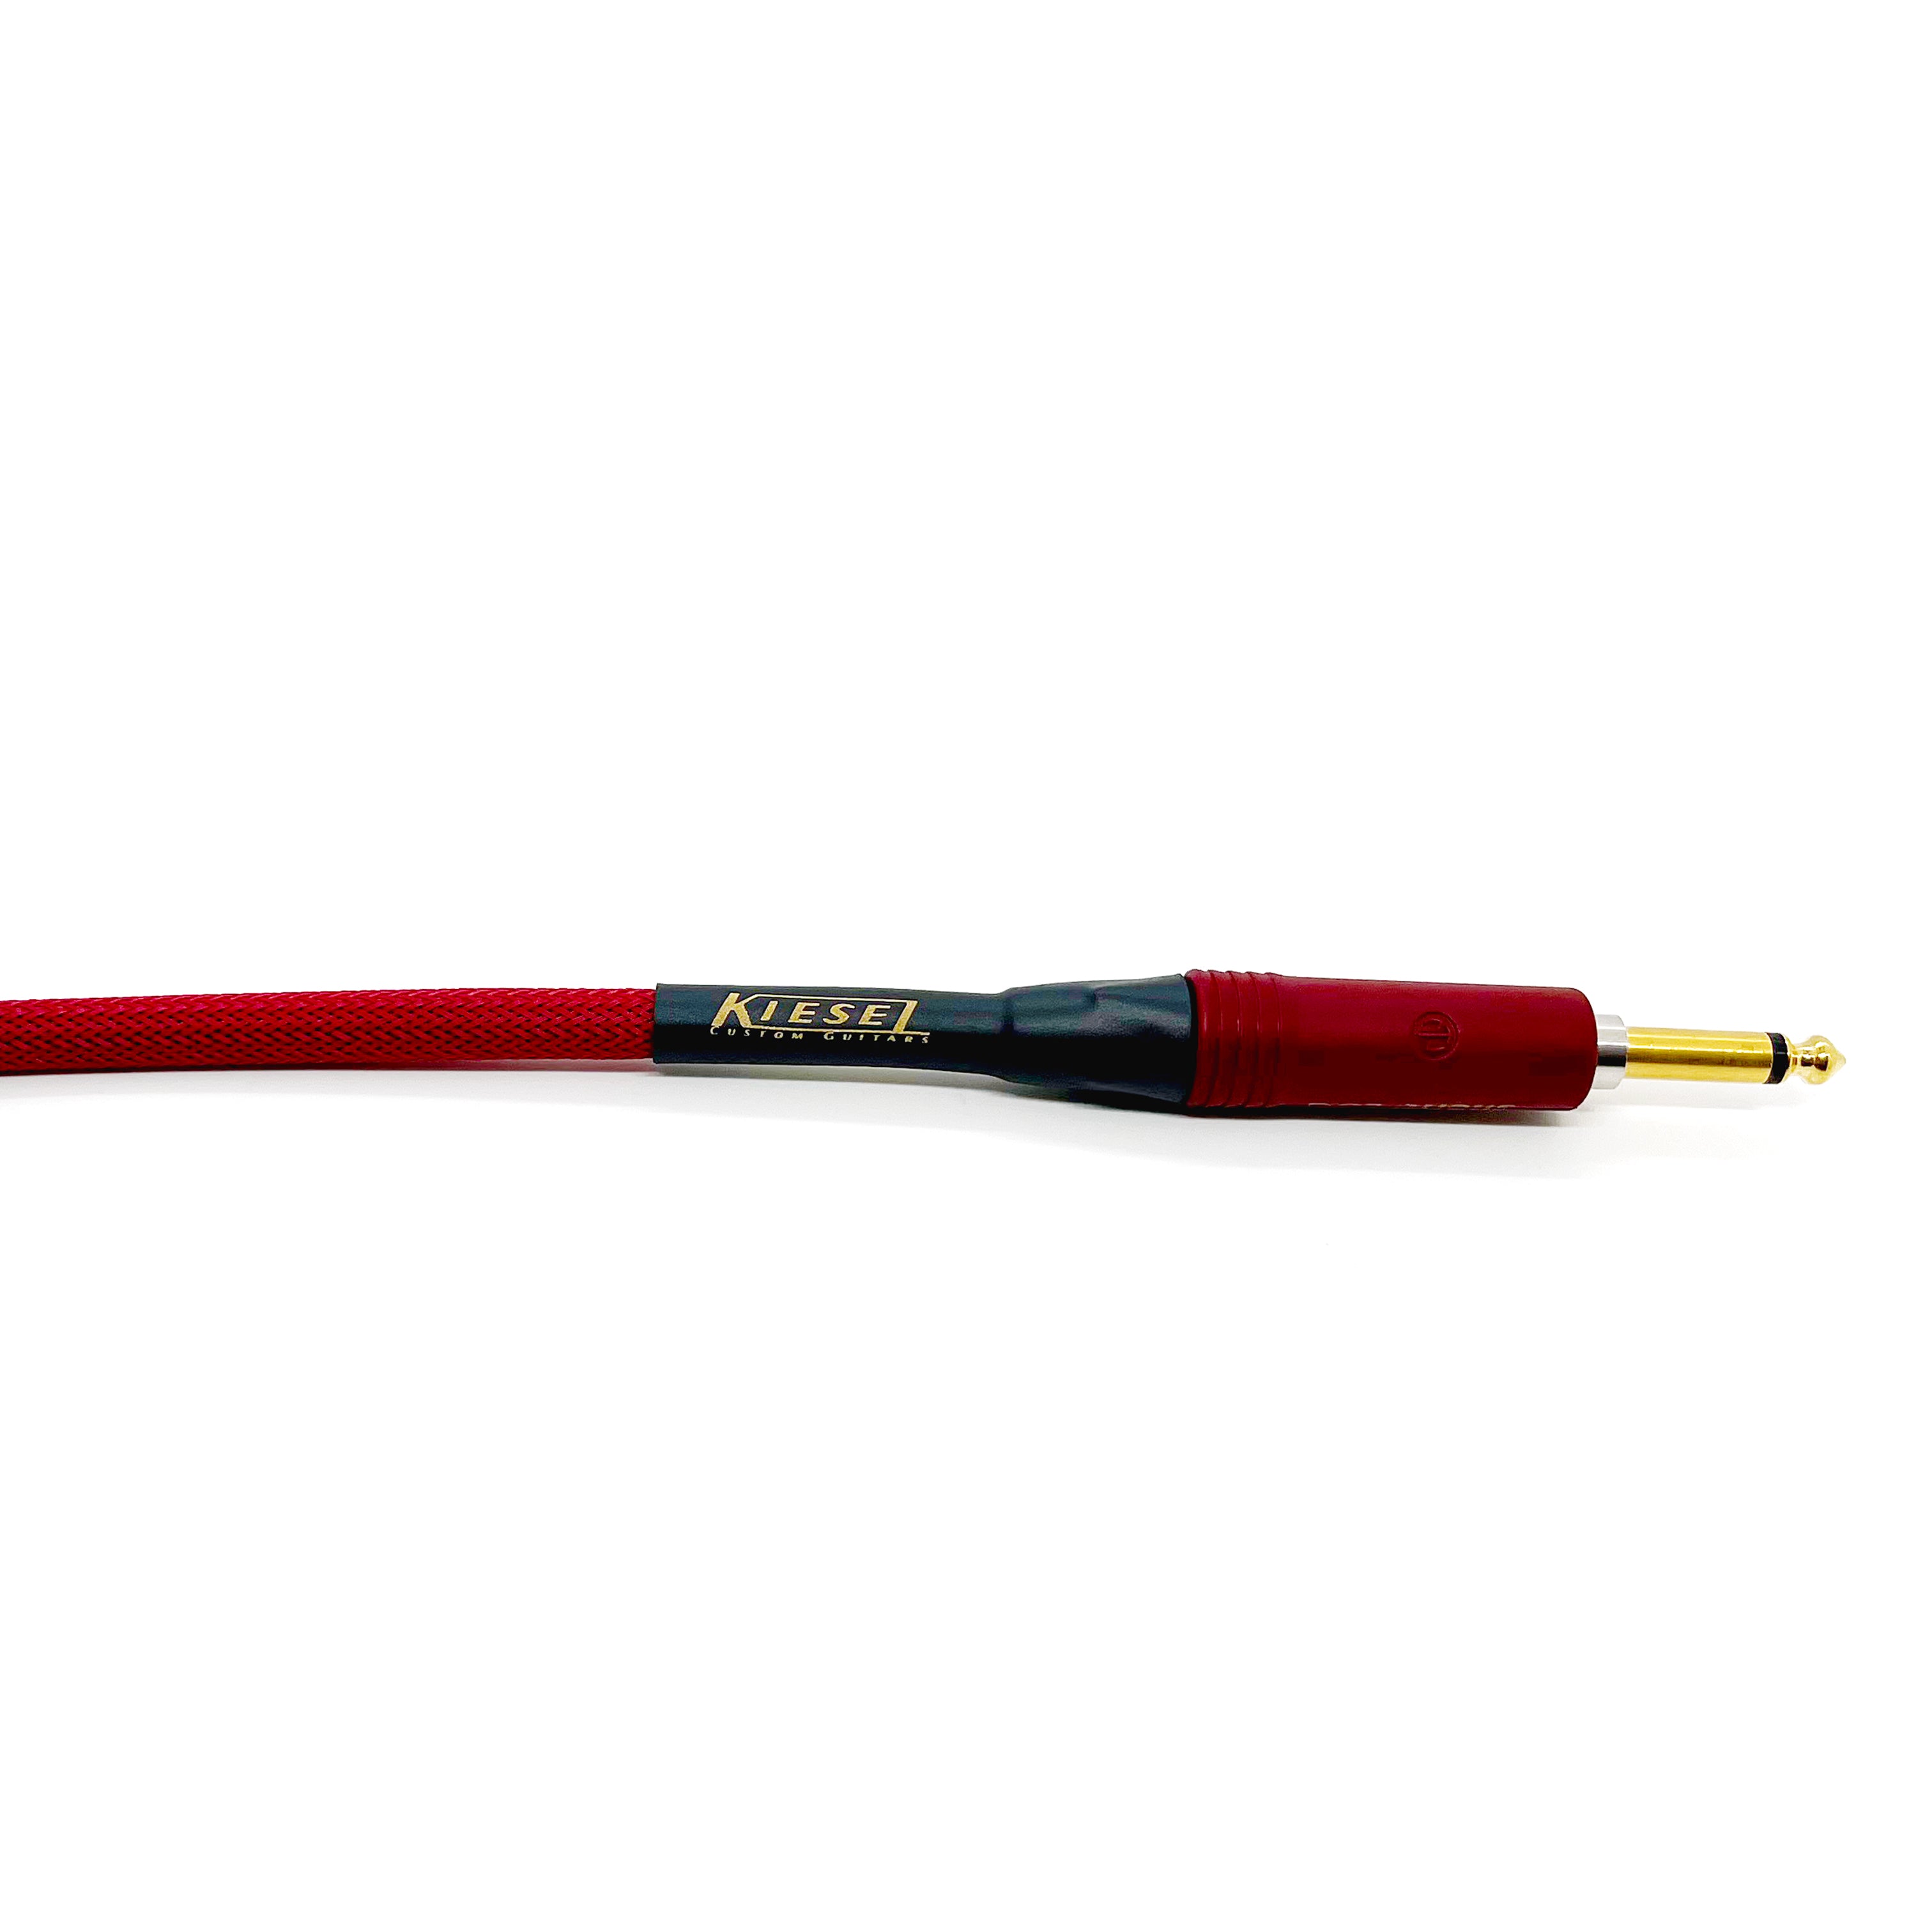 The Kiesel Silent Instrument Cable - Italian Red